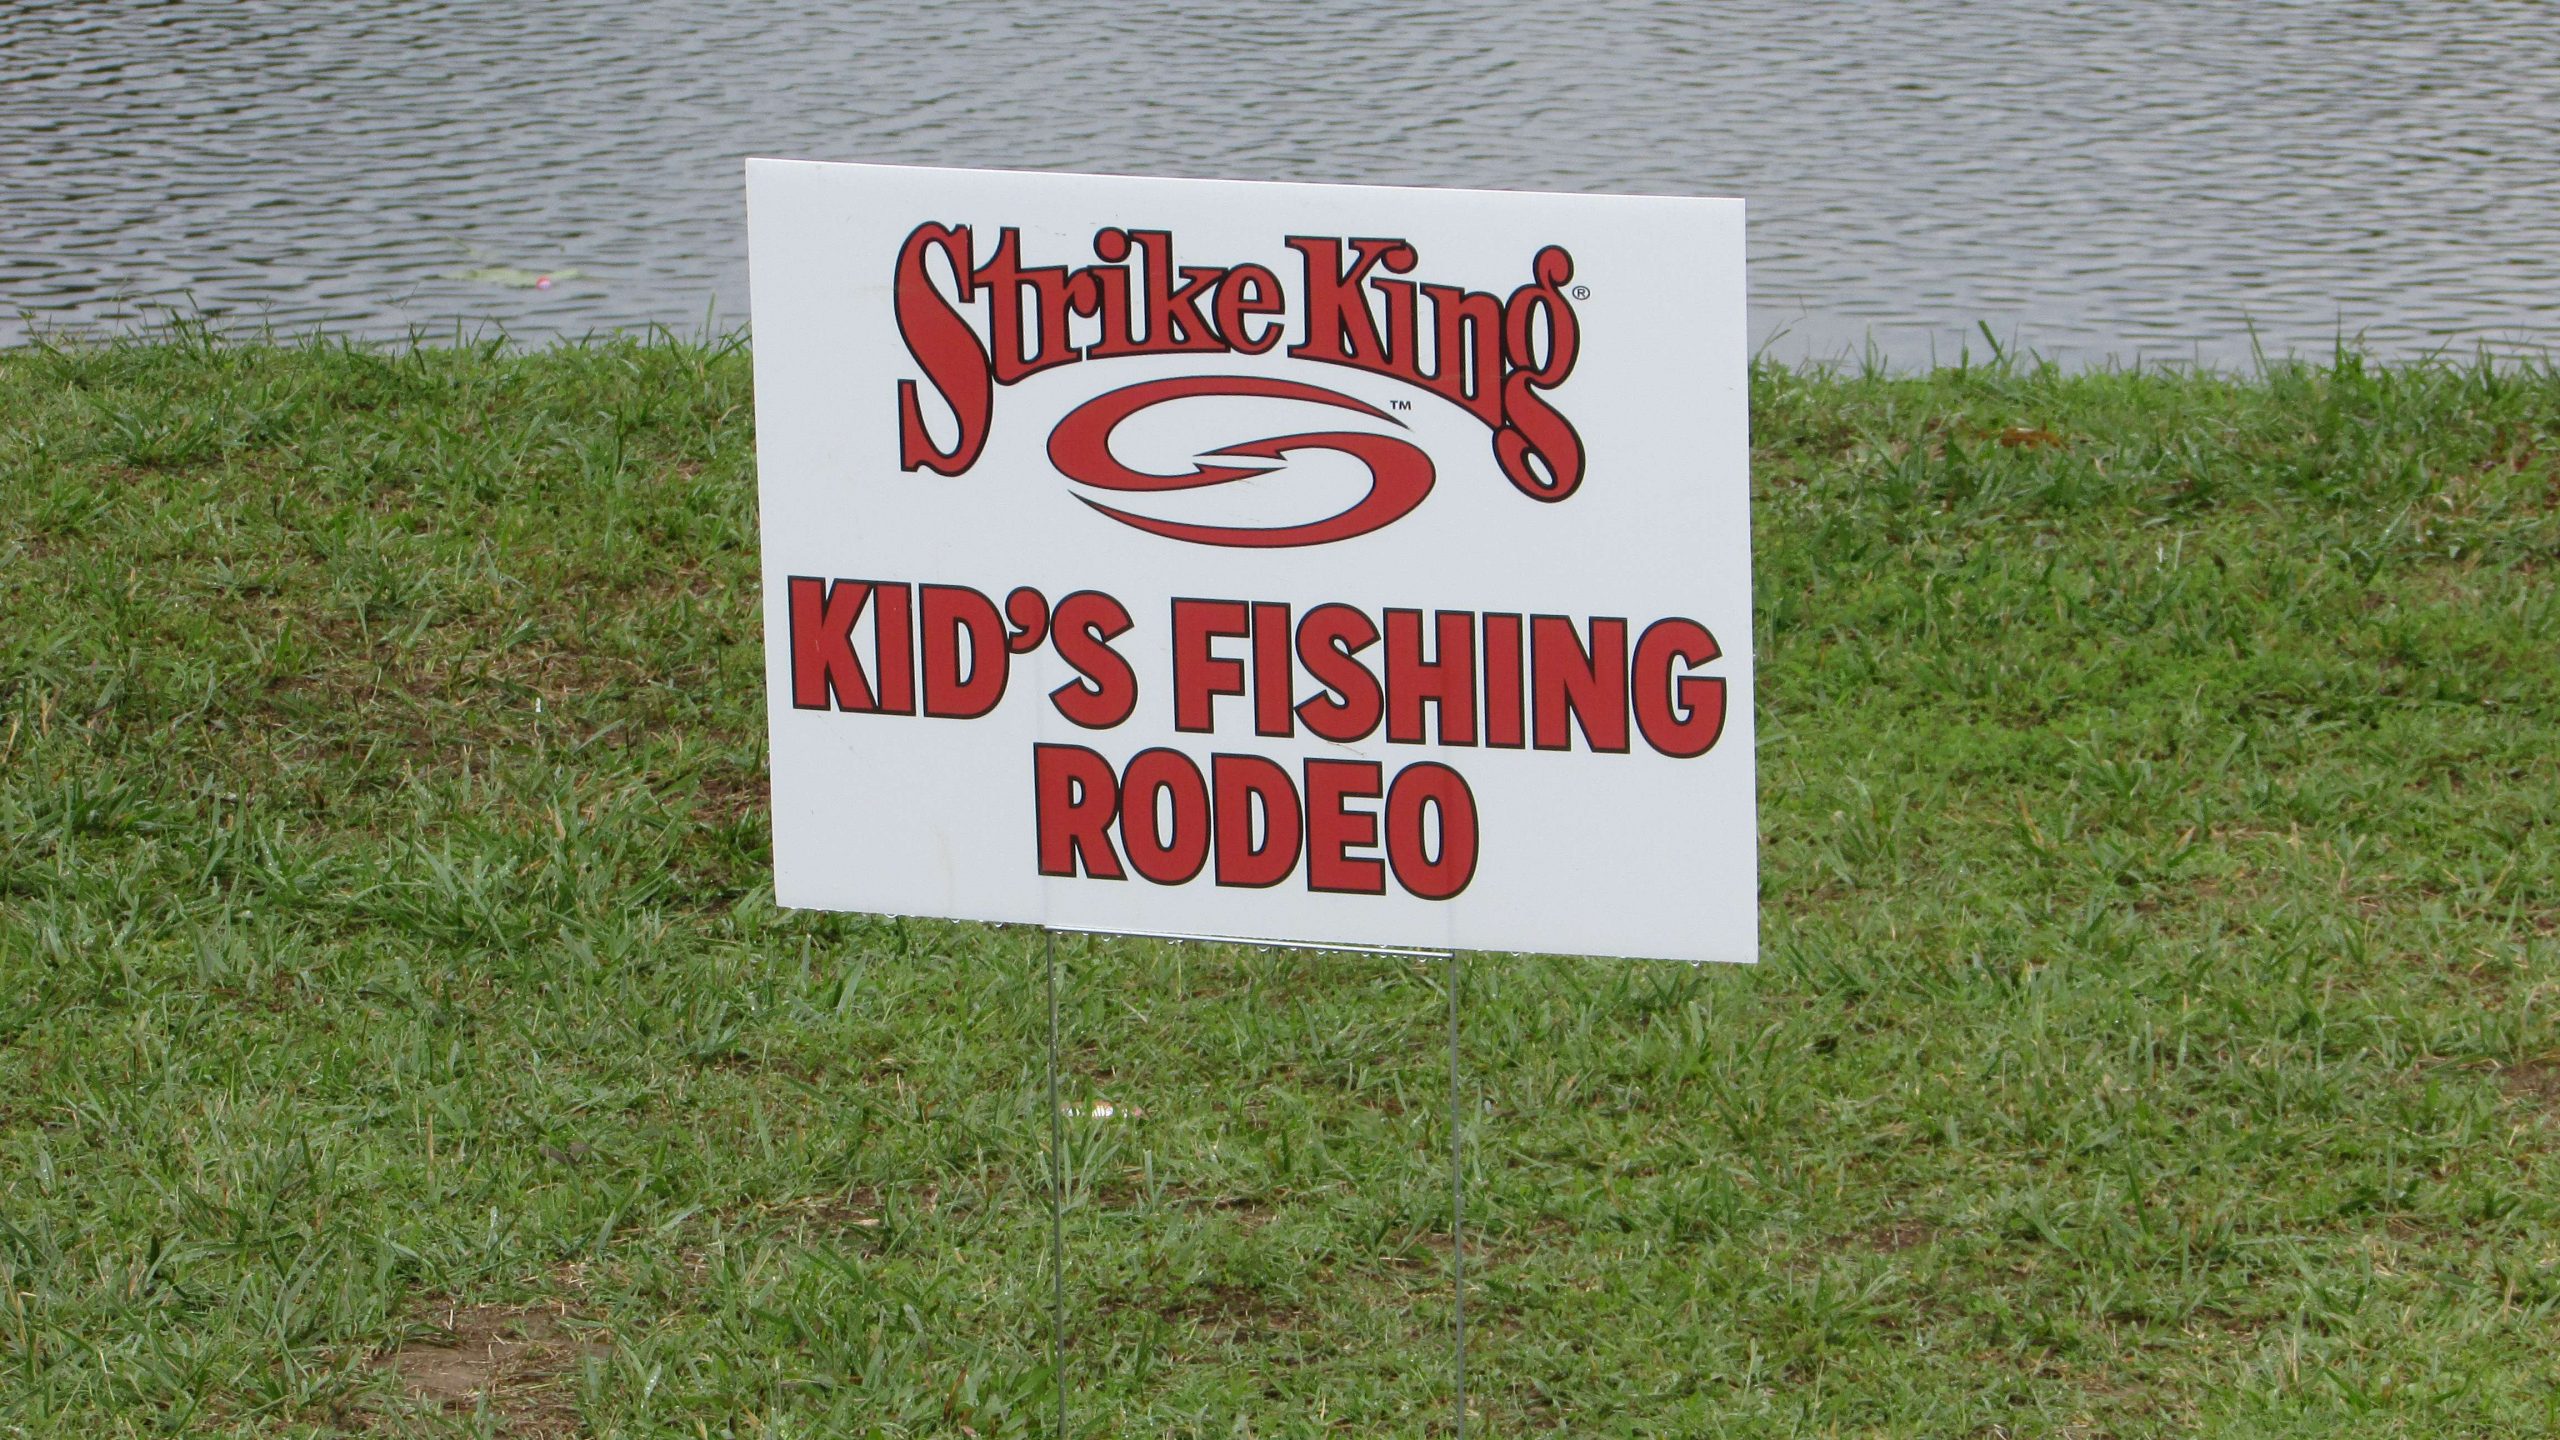 But wait...don't forget the fishing rodeo.